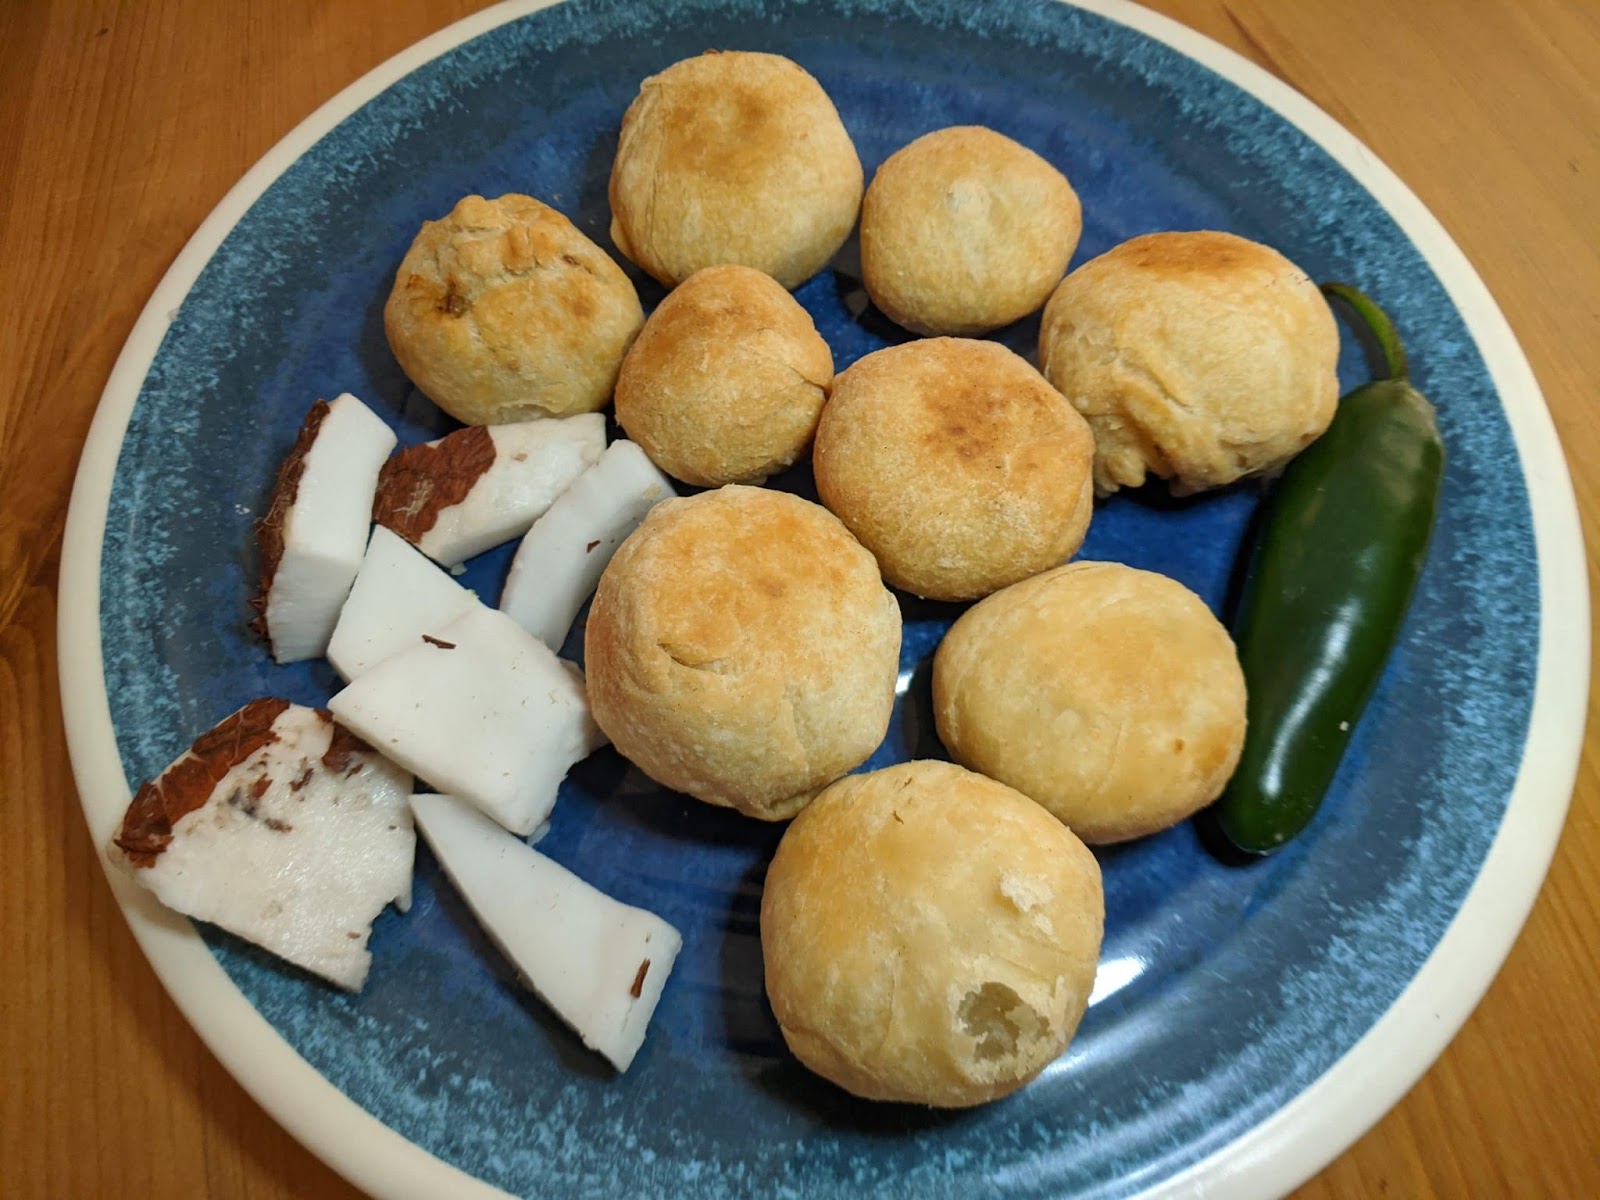 Gulha along with a jalapeno and coconut flesh. Photo Credit: Dinner By Dennis via Google Images